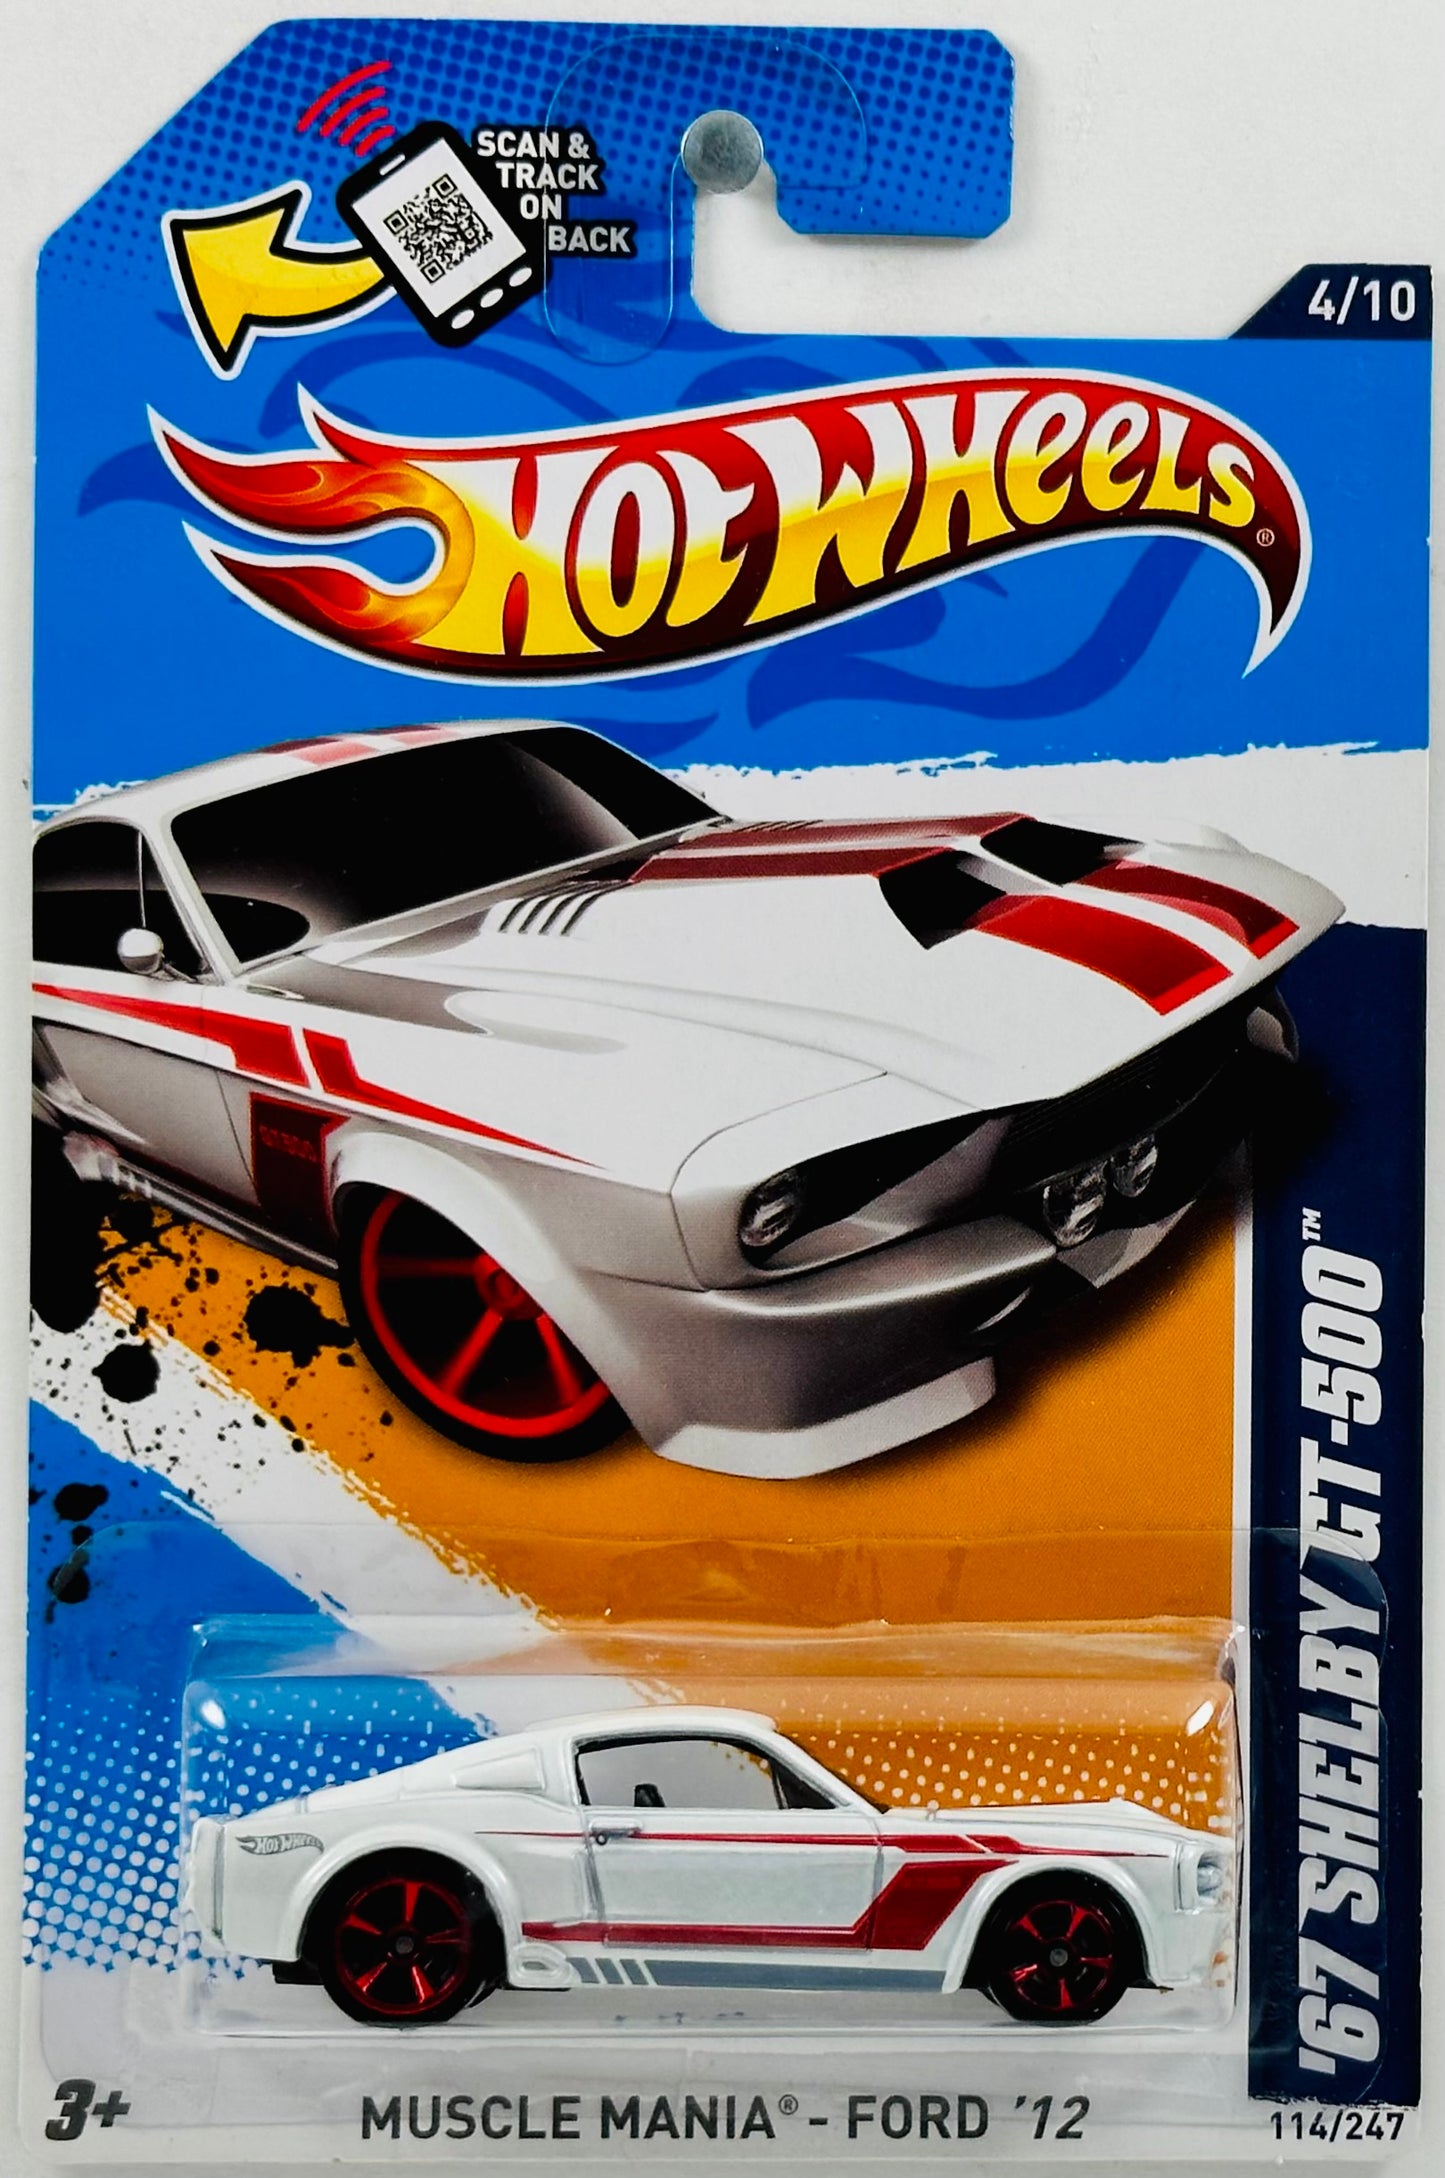 Hot Wheels 2012 - Collector # 114/247 - Muscle Mania - Ford 04/10 - '67 Shelby GT-500 - Pearl White - USA